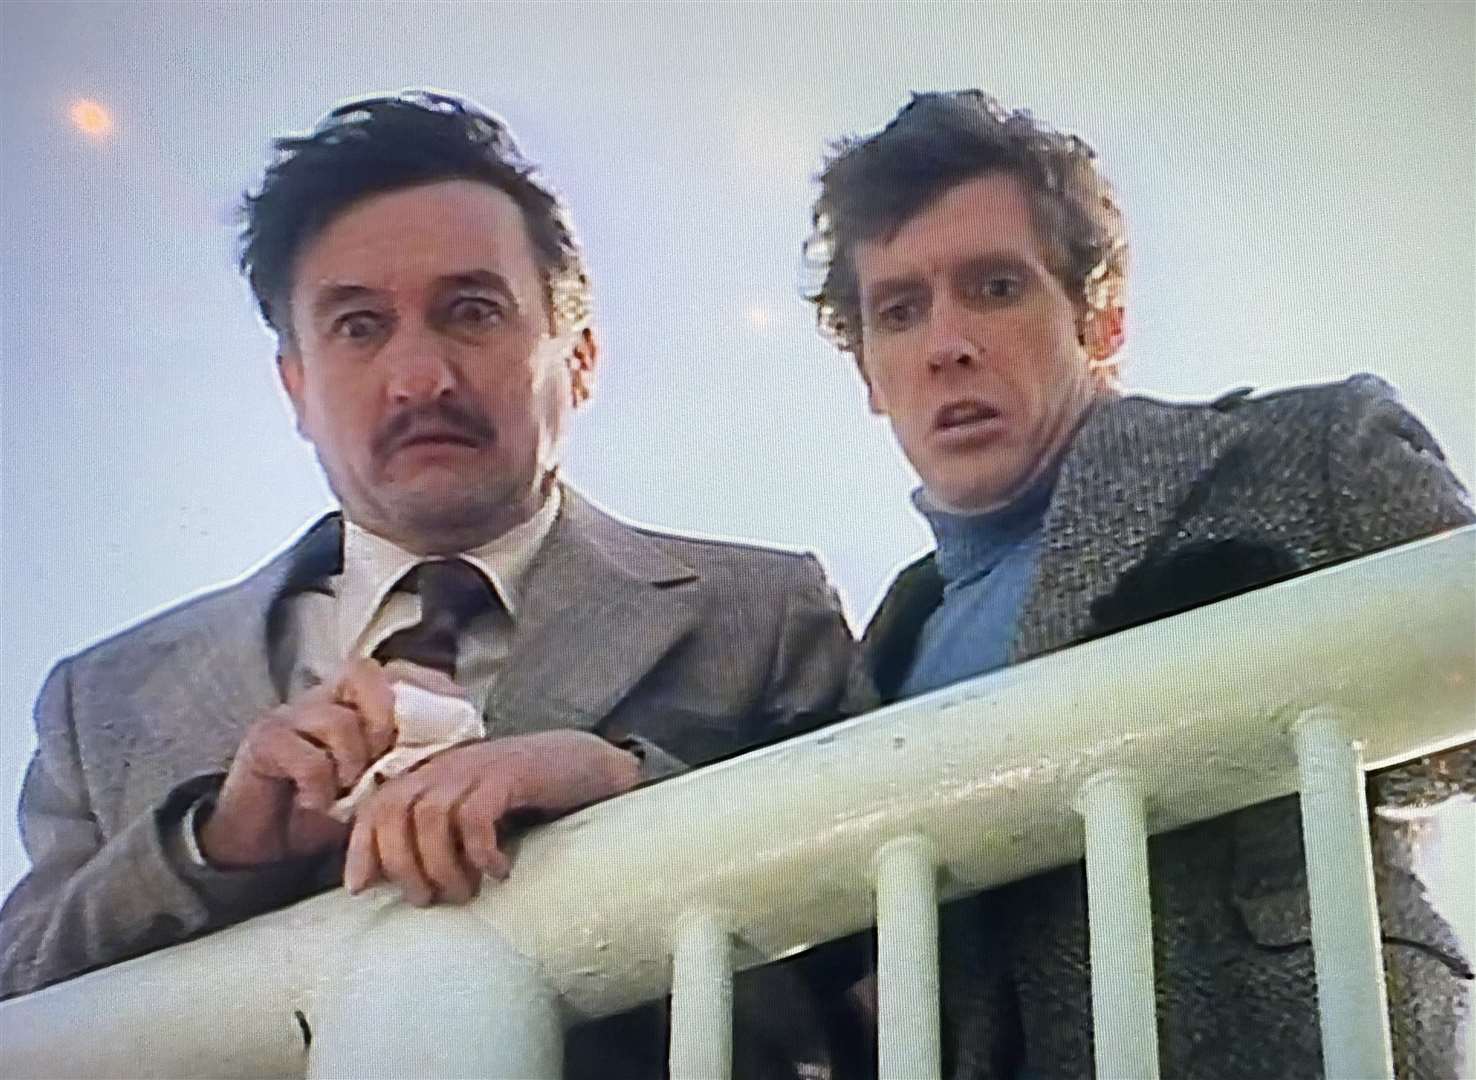 Michael Crawford starred as Frank Spencer in the 1975 BBC comedy Christmas special of Some Mothers Do 'Ave 'Em called Learning To Drive filmed on the Isle of Sheppey. Picture: BBC TV